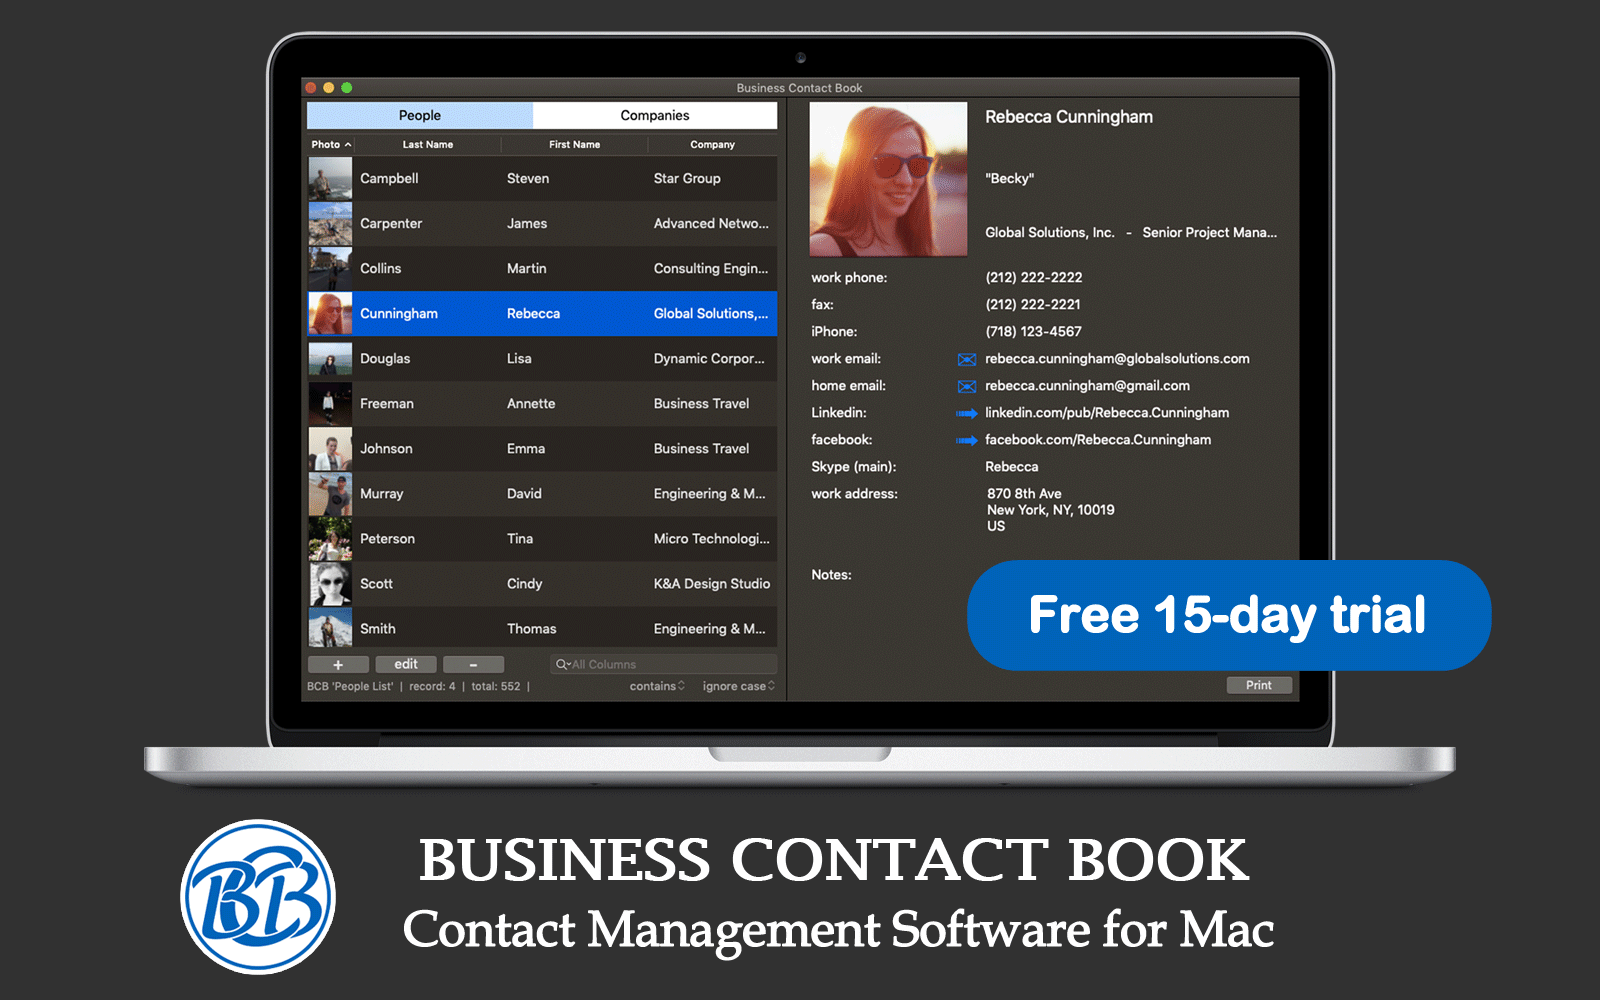 Business Contact Book - Contact Management Software